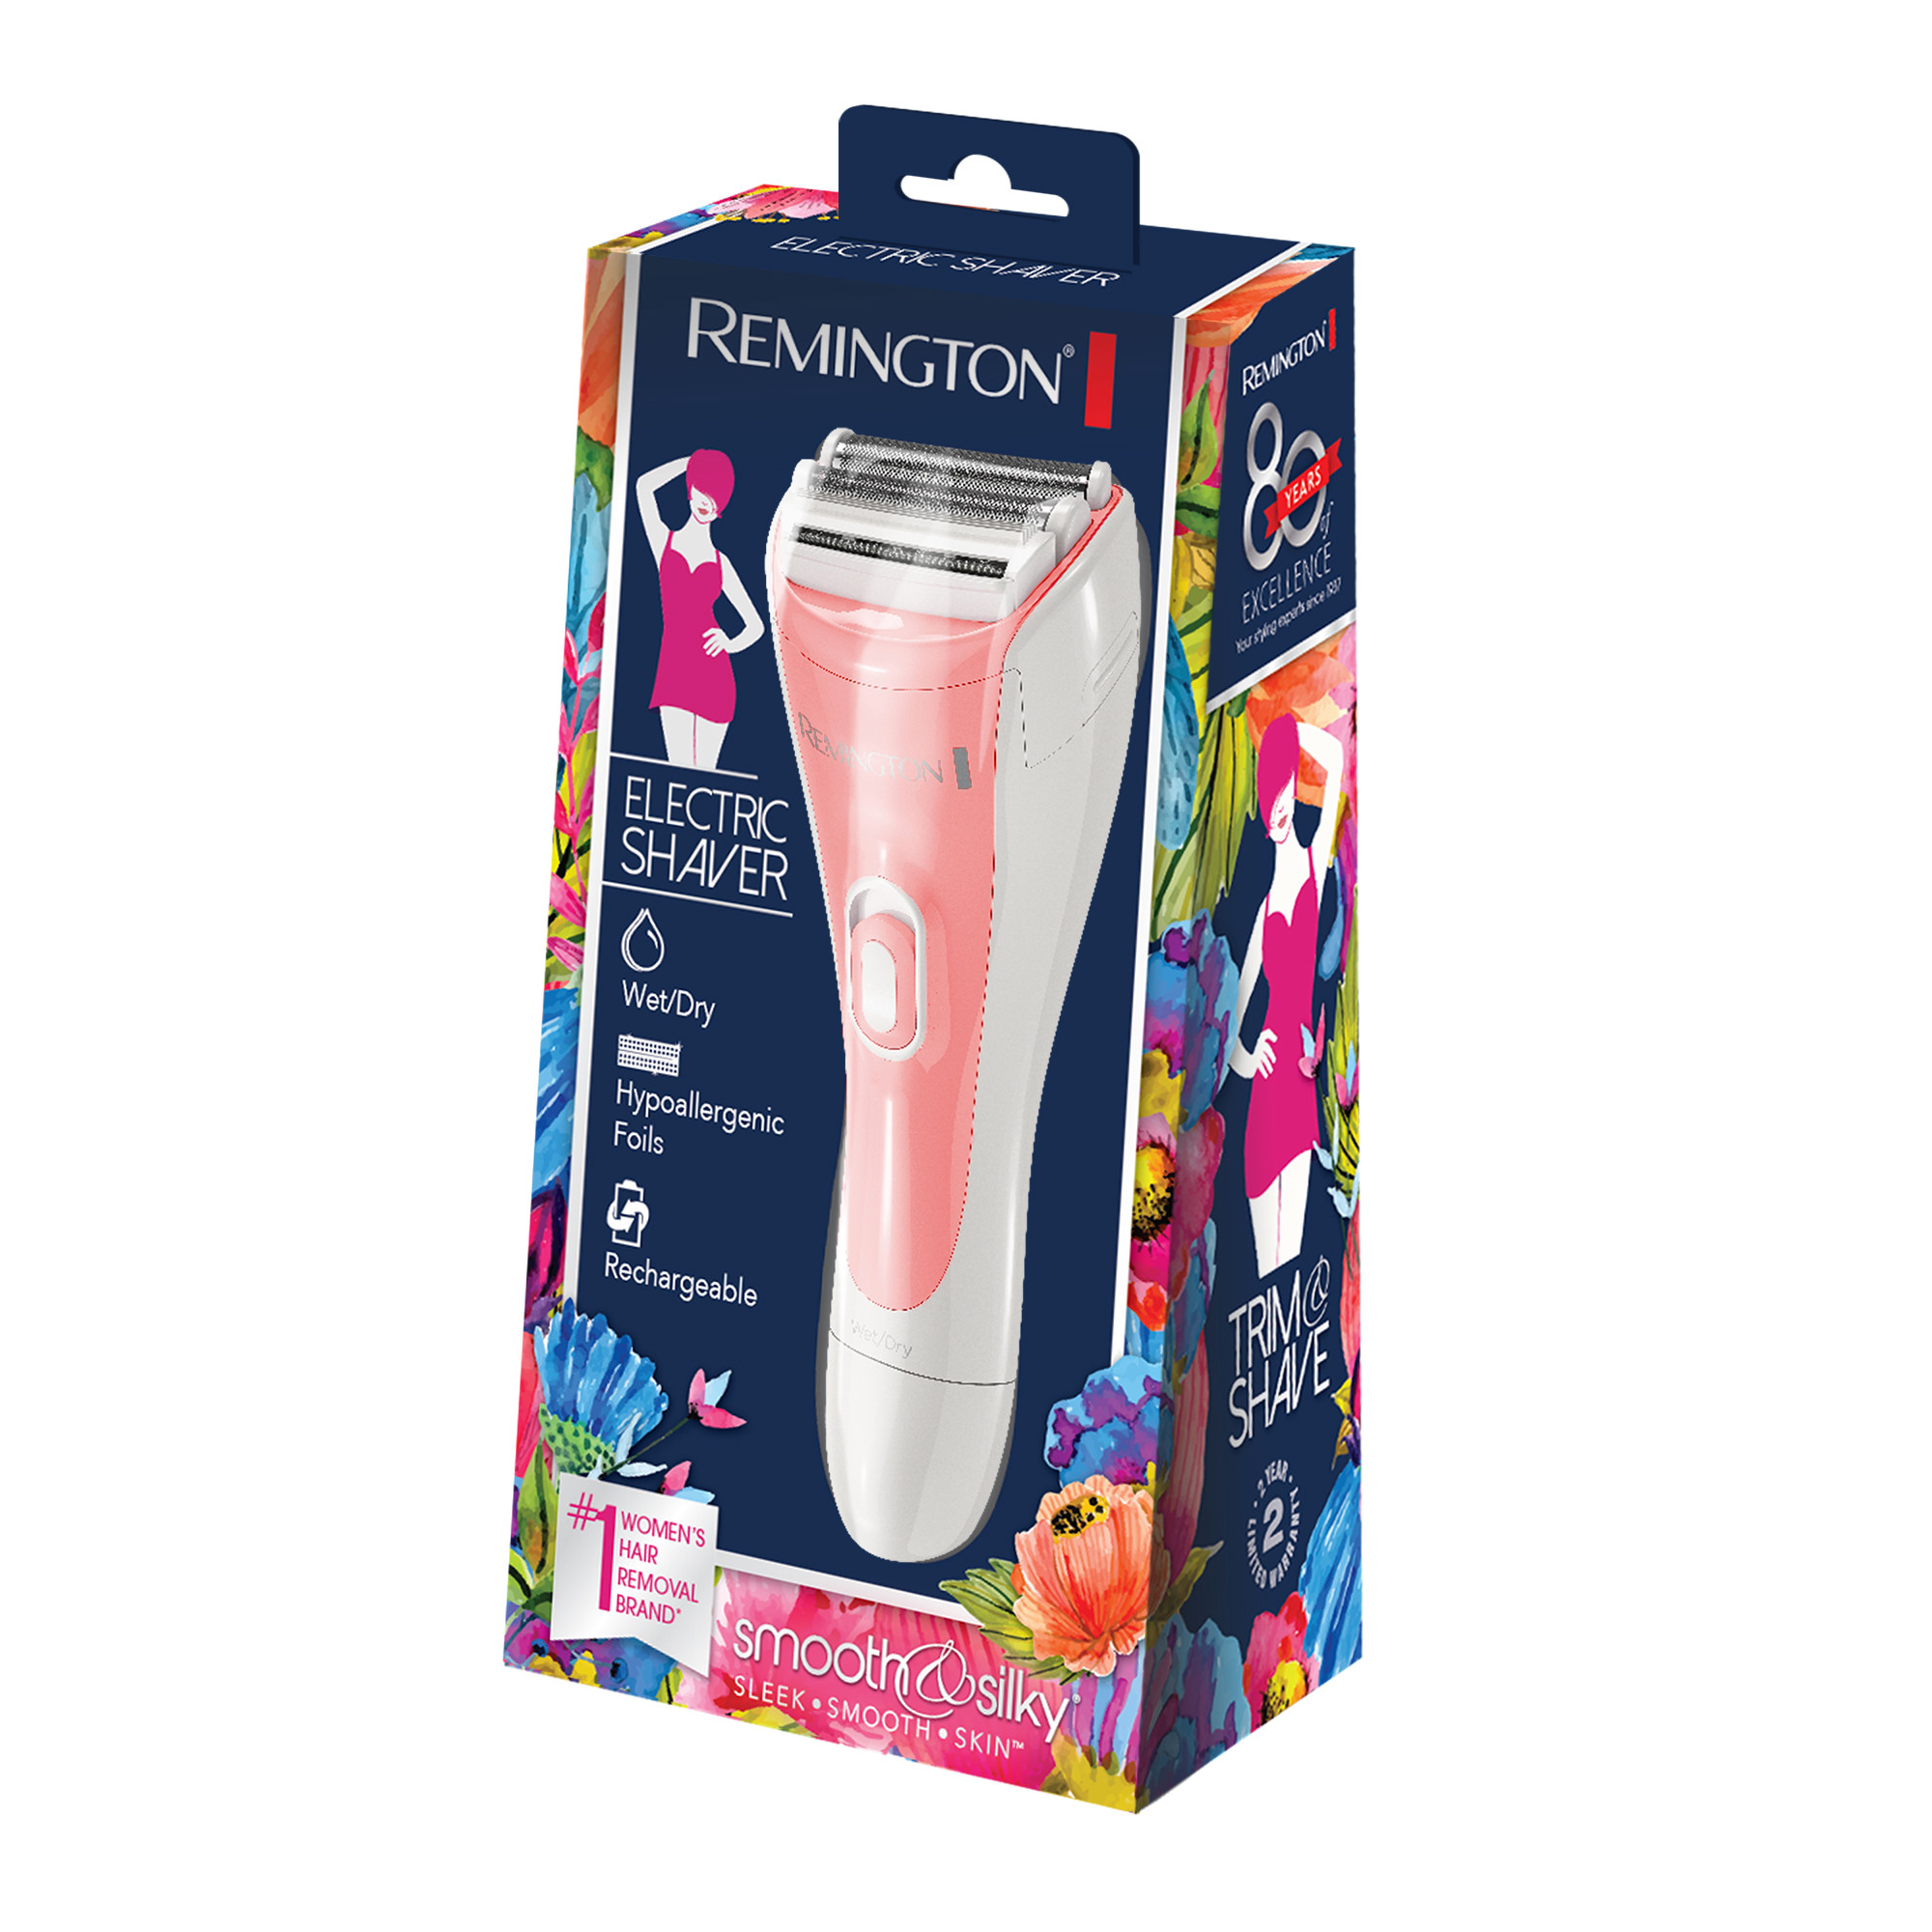 Remington Smooth & Silky Rechargeable Shave System